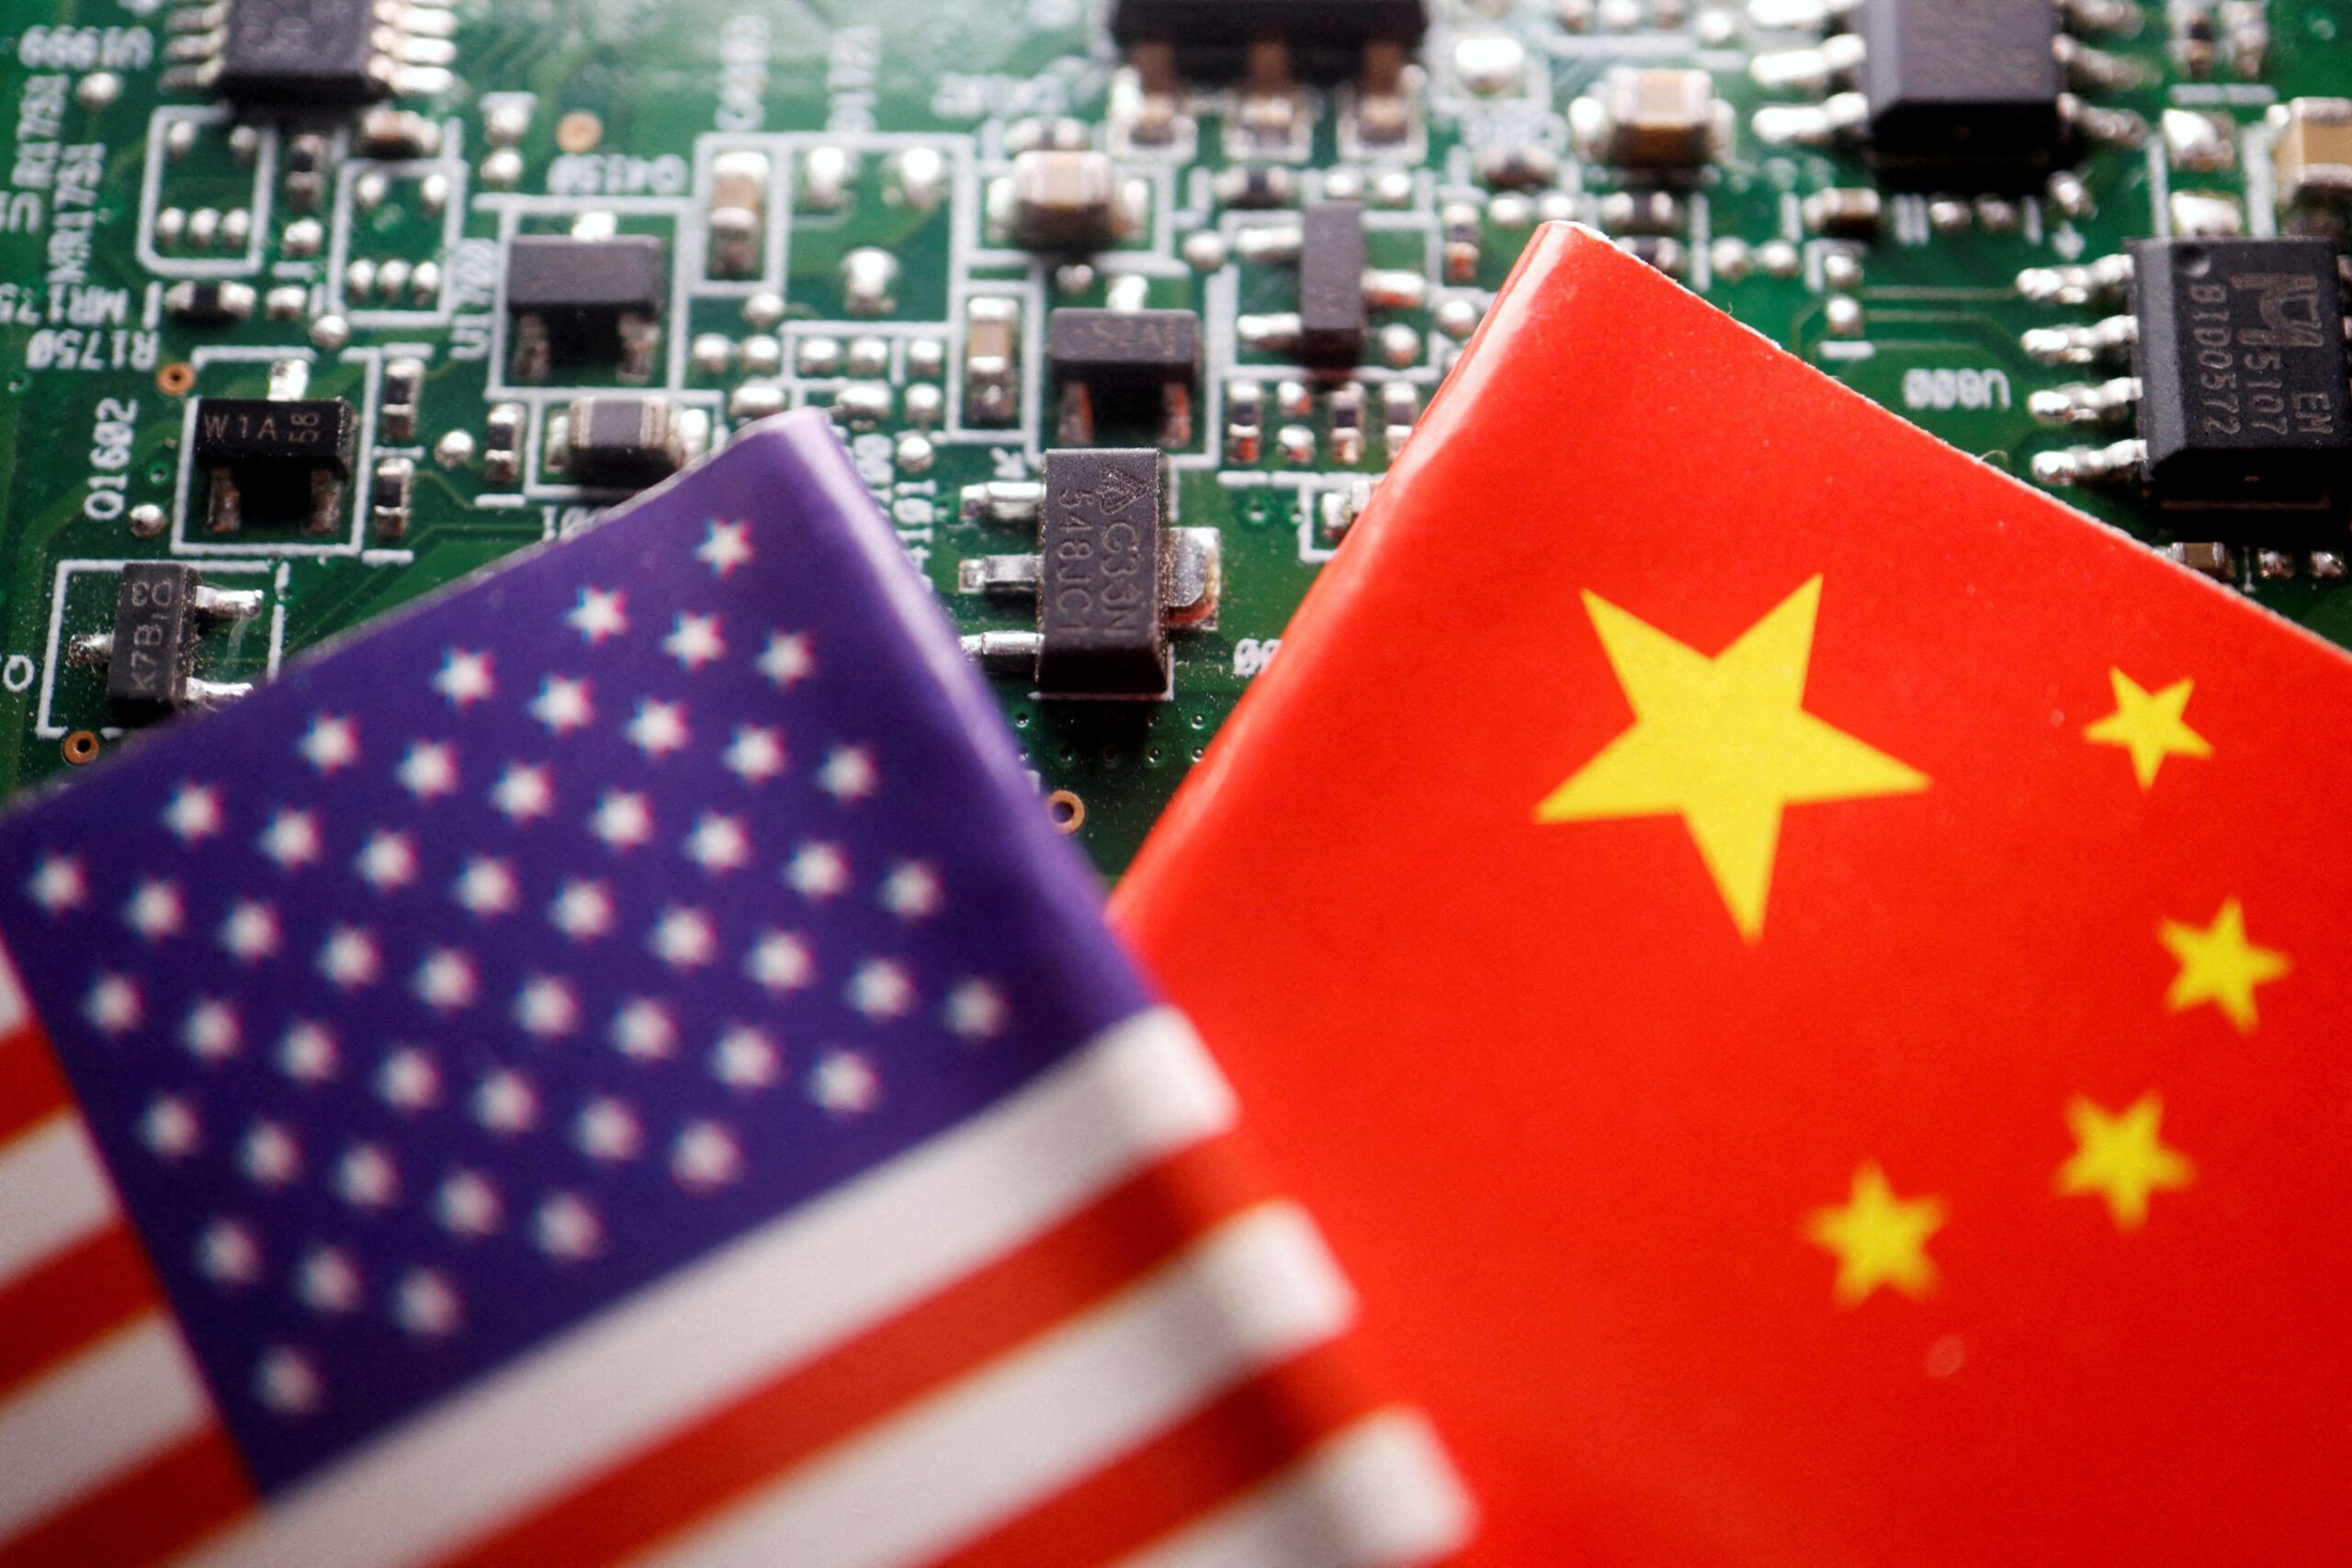 US unveils draft rules to ban investments in China's AI, tech sectors